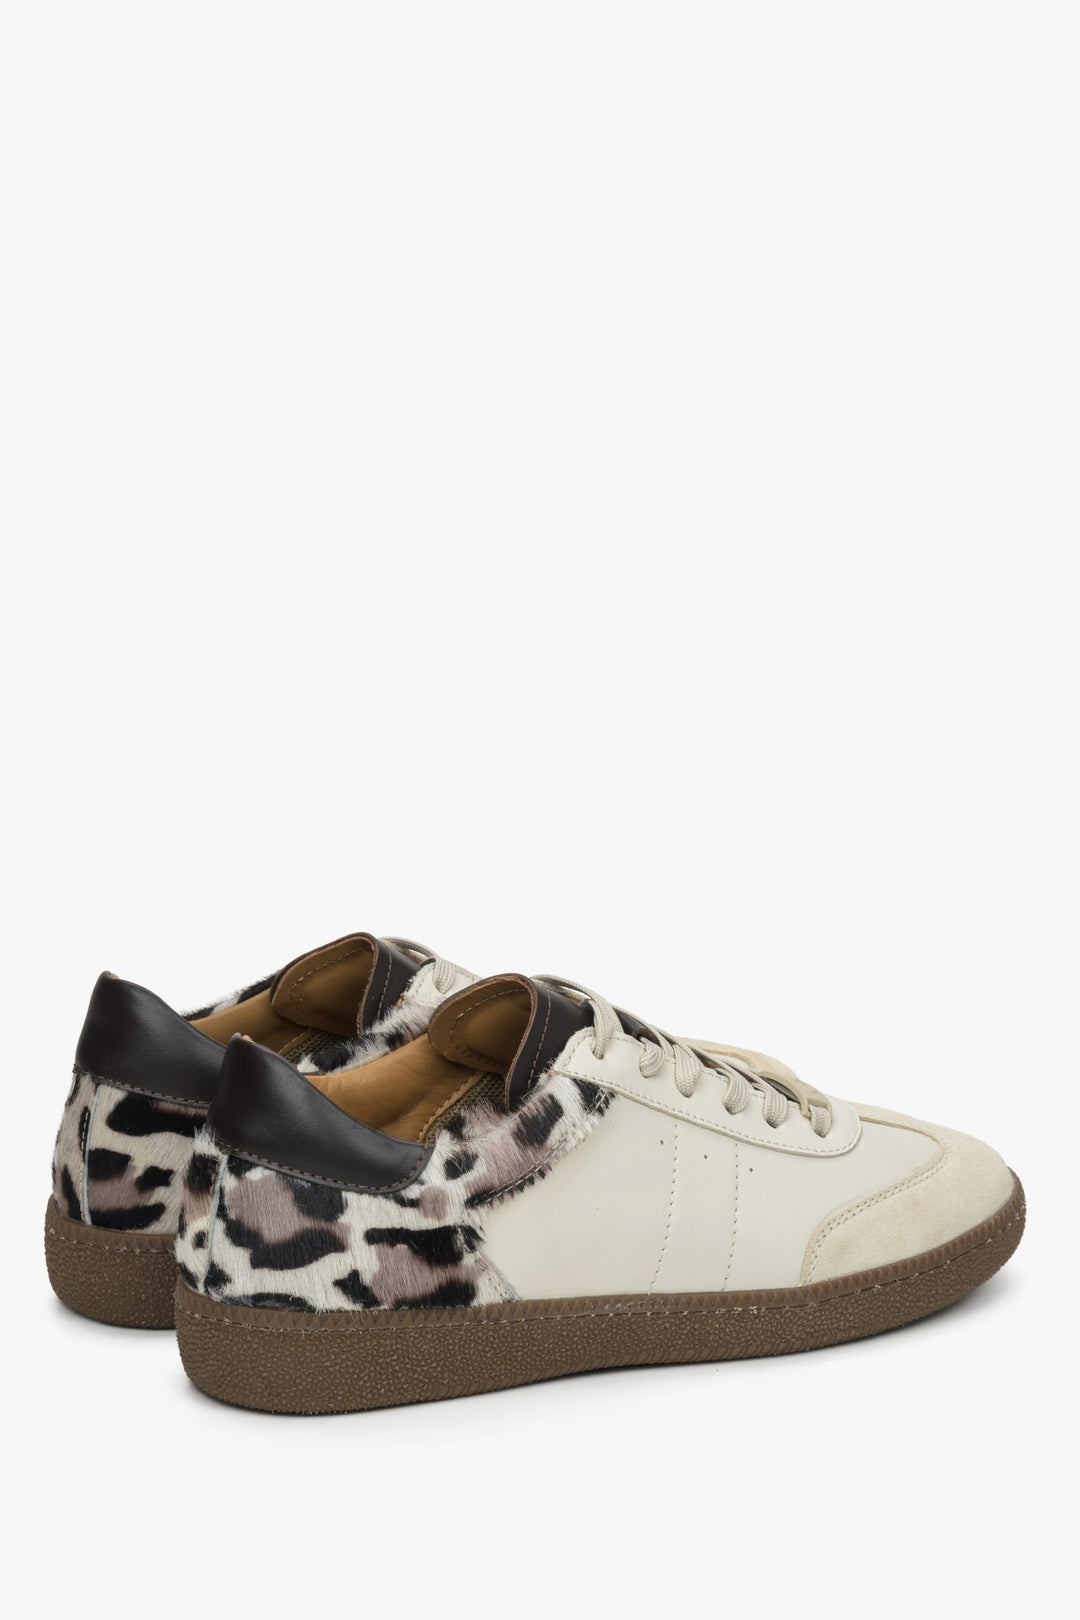 Women's beige sneakers made of genuine leather with an Estro animal pattern.